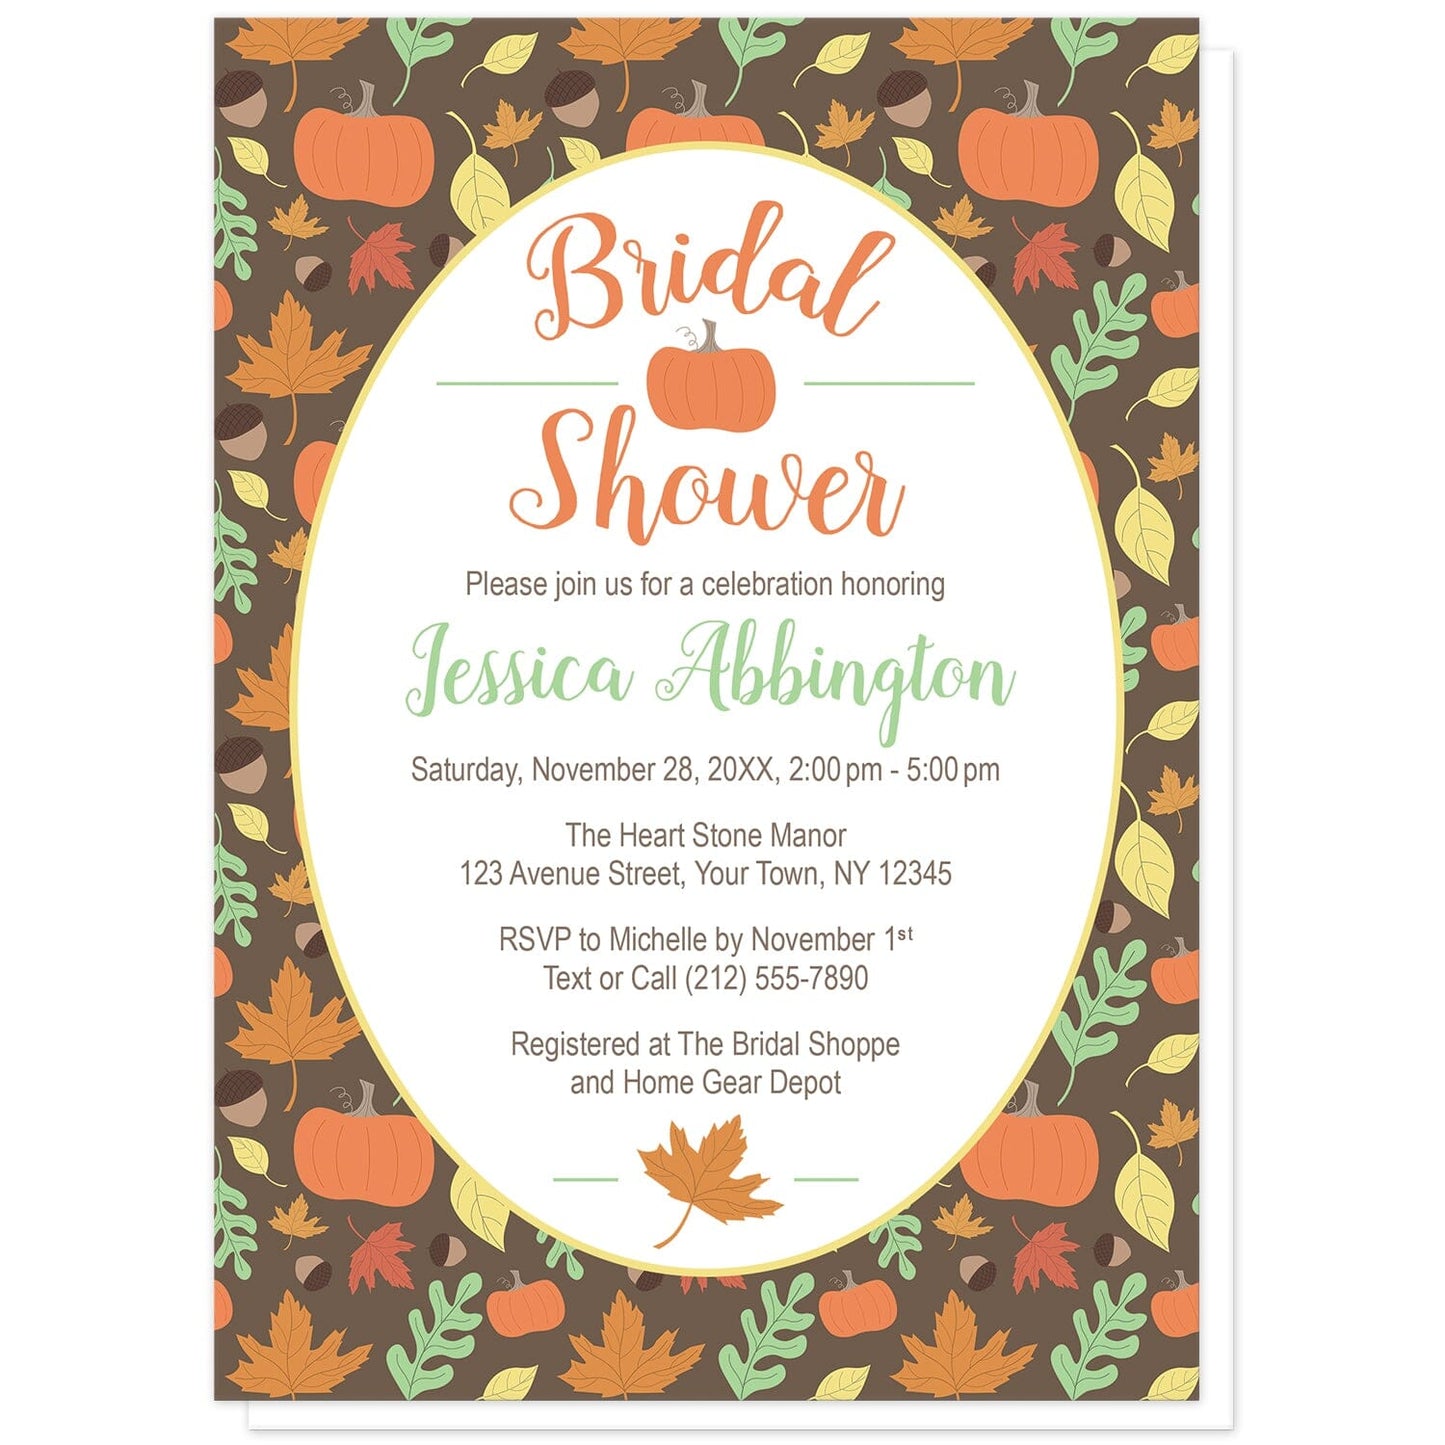 Autumn Pumpkins and Leaves Pattern Bridal Shower Invitations at Artistically Invited. Seasonally fun autumn pumpkins and leaves pattern bridal shower invitations with a cute pattern of orange pumpkins, fall leaves, and acorns over a brown background color. Your personalized autumn bridal shower invitation details are custom printed in orange, light green, and brown in a white oval over this illustrated fall pumpkins and leaves pattern background.